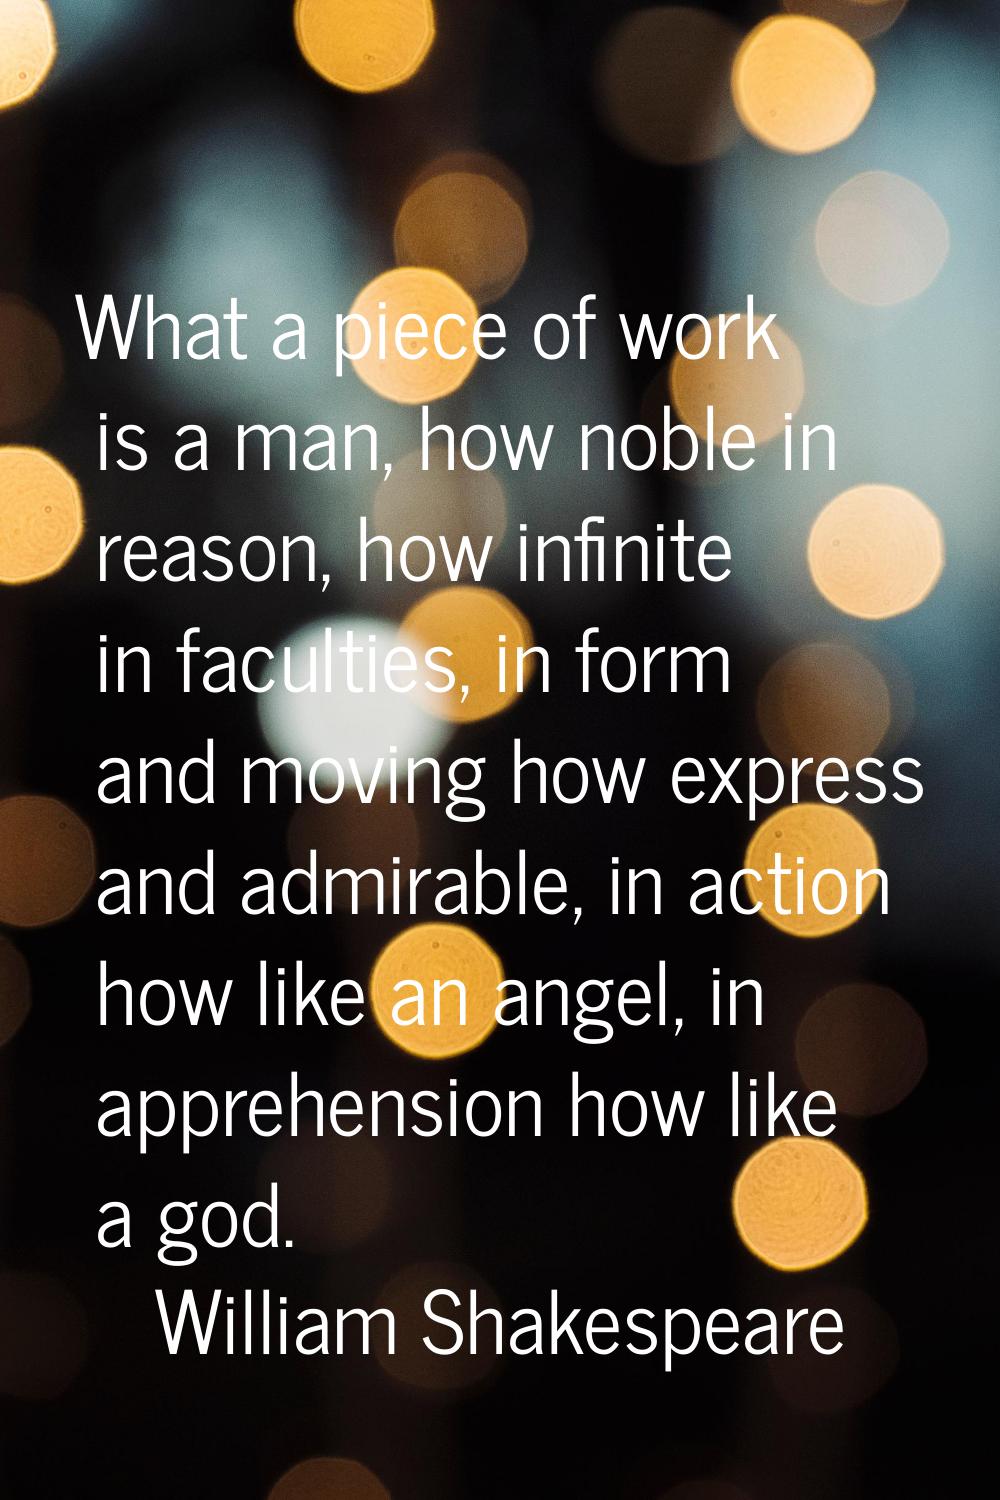 What a piece of work is a man, how noble in reason, how infinite in faculties, in form and moving h